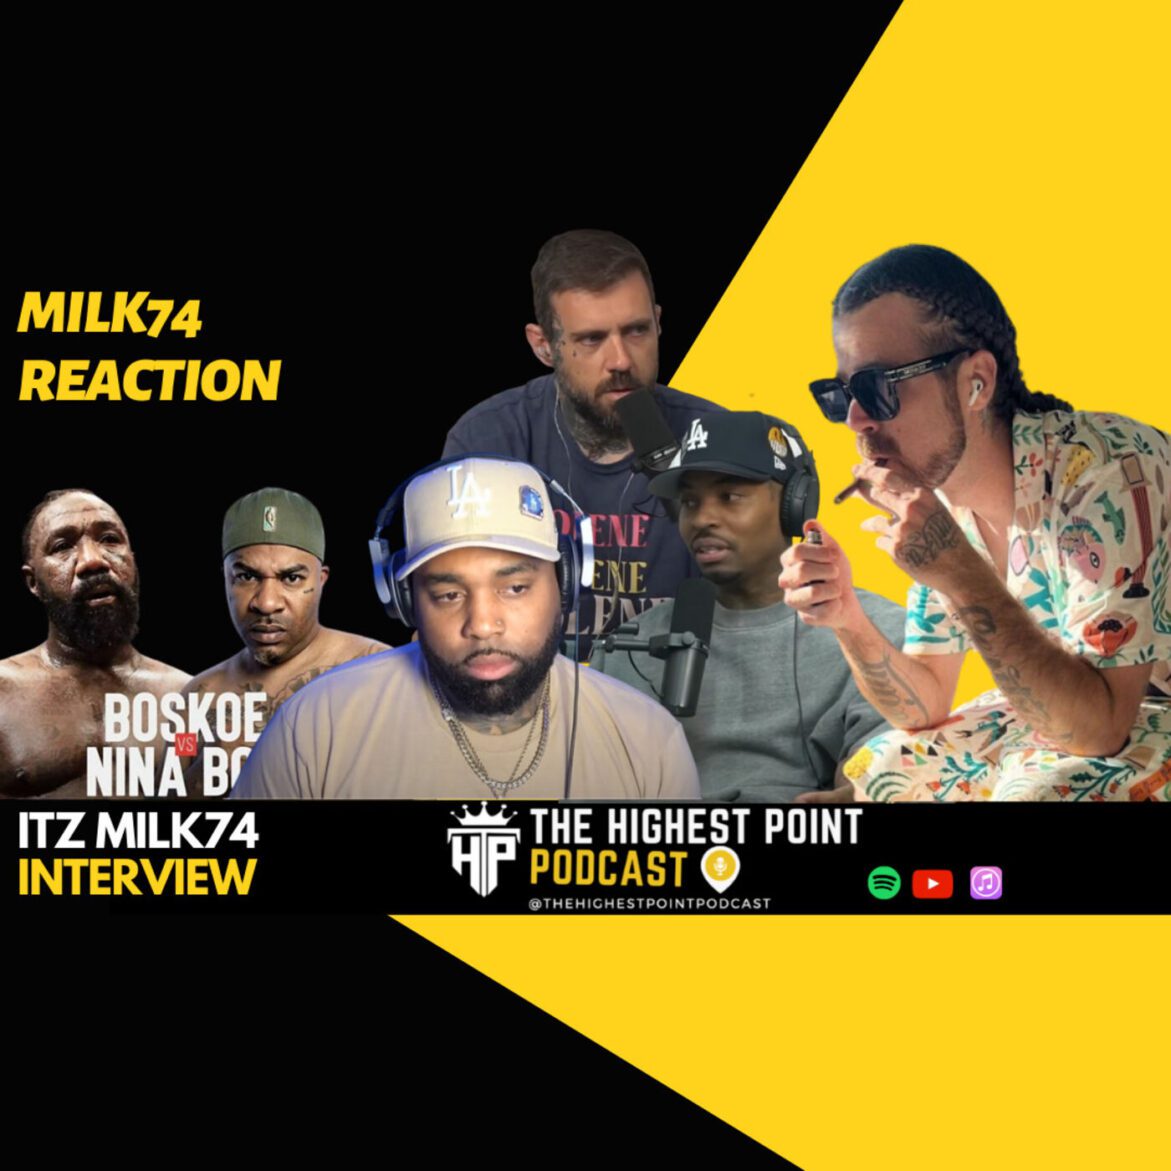 Black Podcasting - Milk74 detail beef with Adam22 & No Jumper, Being adopted at 7 days old by a black family,  reacts to Boskoe100 vs Nina boy fight, details Wack 100 issue, and more